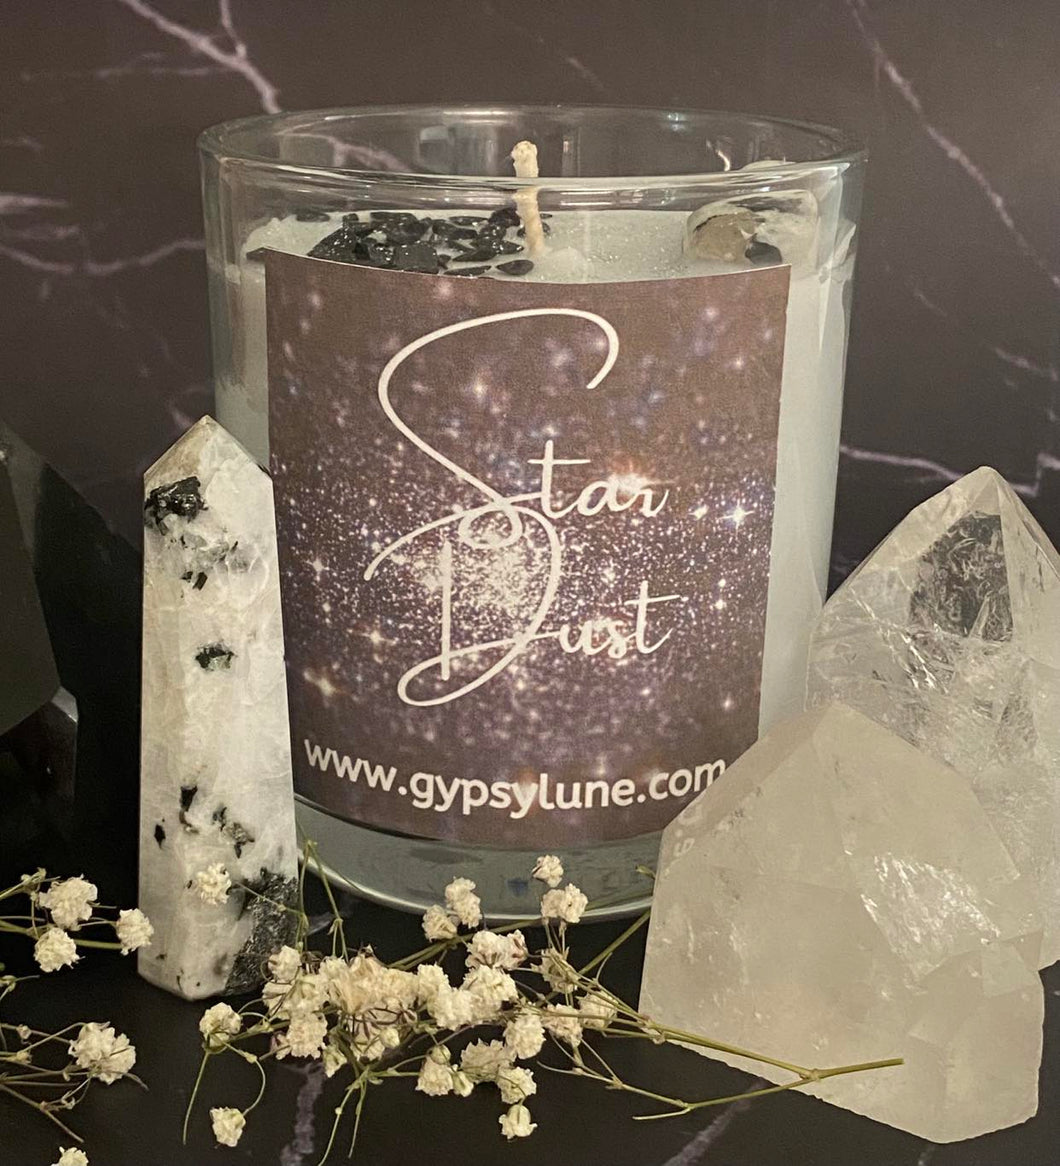 Star Dust Crystal Candle - SMALL SIZE ONE ONLY